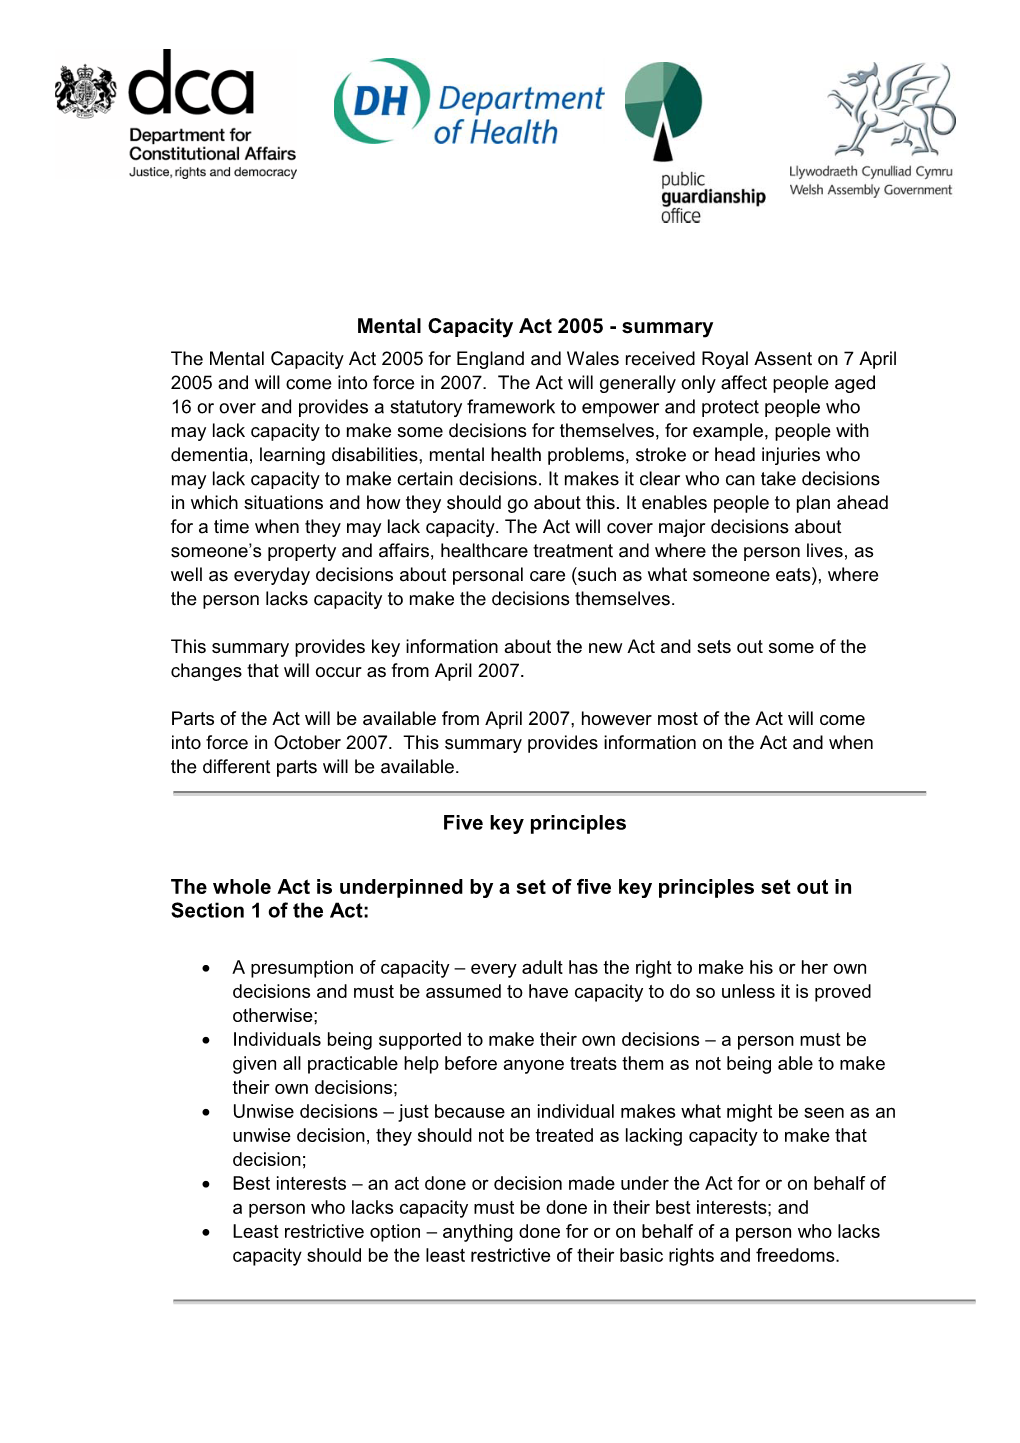 Mental Capacity Act 2005 - Summary the Mental Capacity Act 2005 for England and Wales Received Royal Assent on 7 April 2005 and Will Come Into Force in 2007